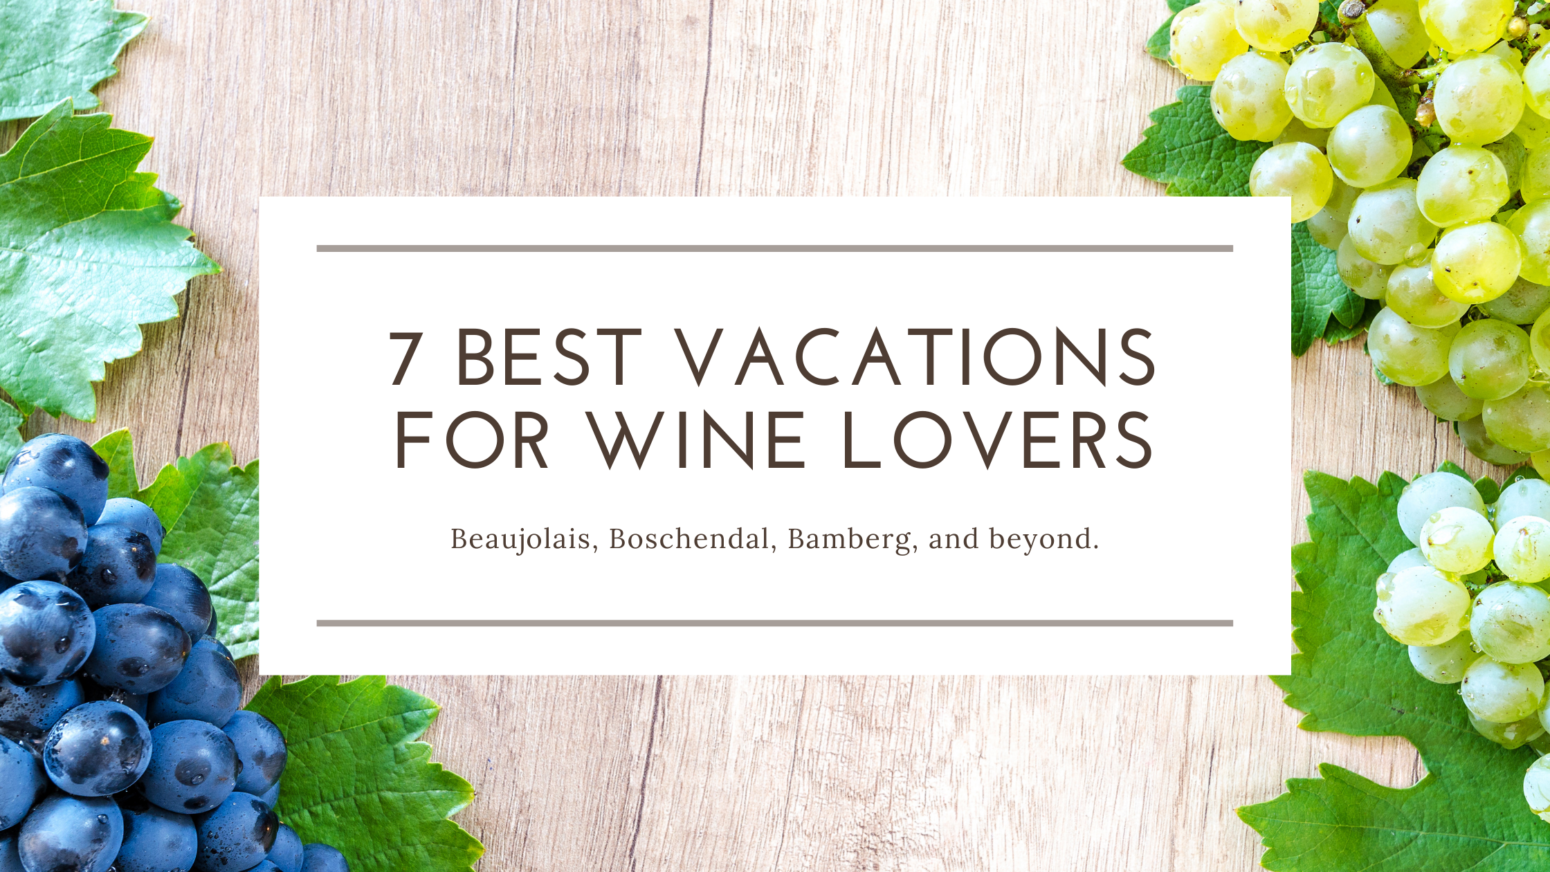 Vacations for wine lovers